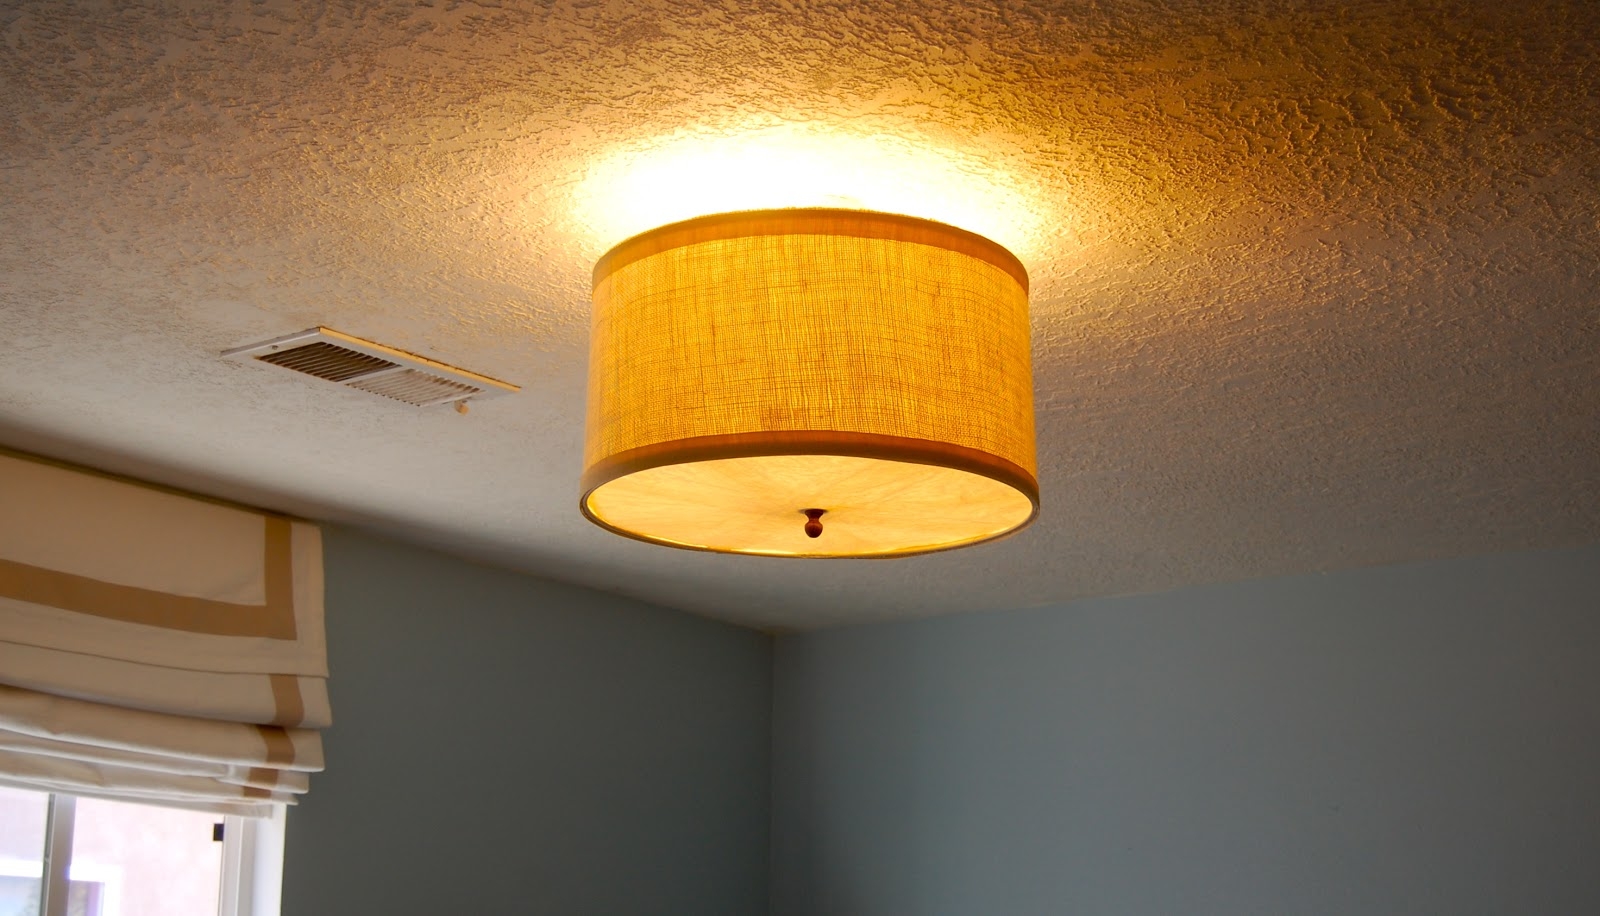 Drum Shade Ceiling Light Cover